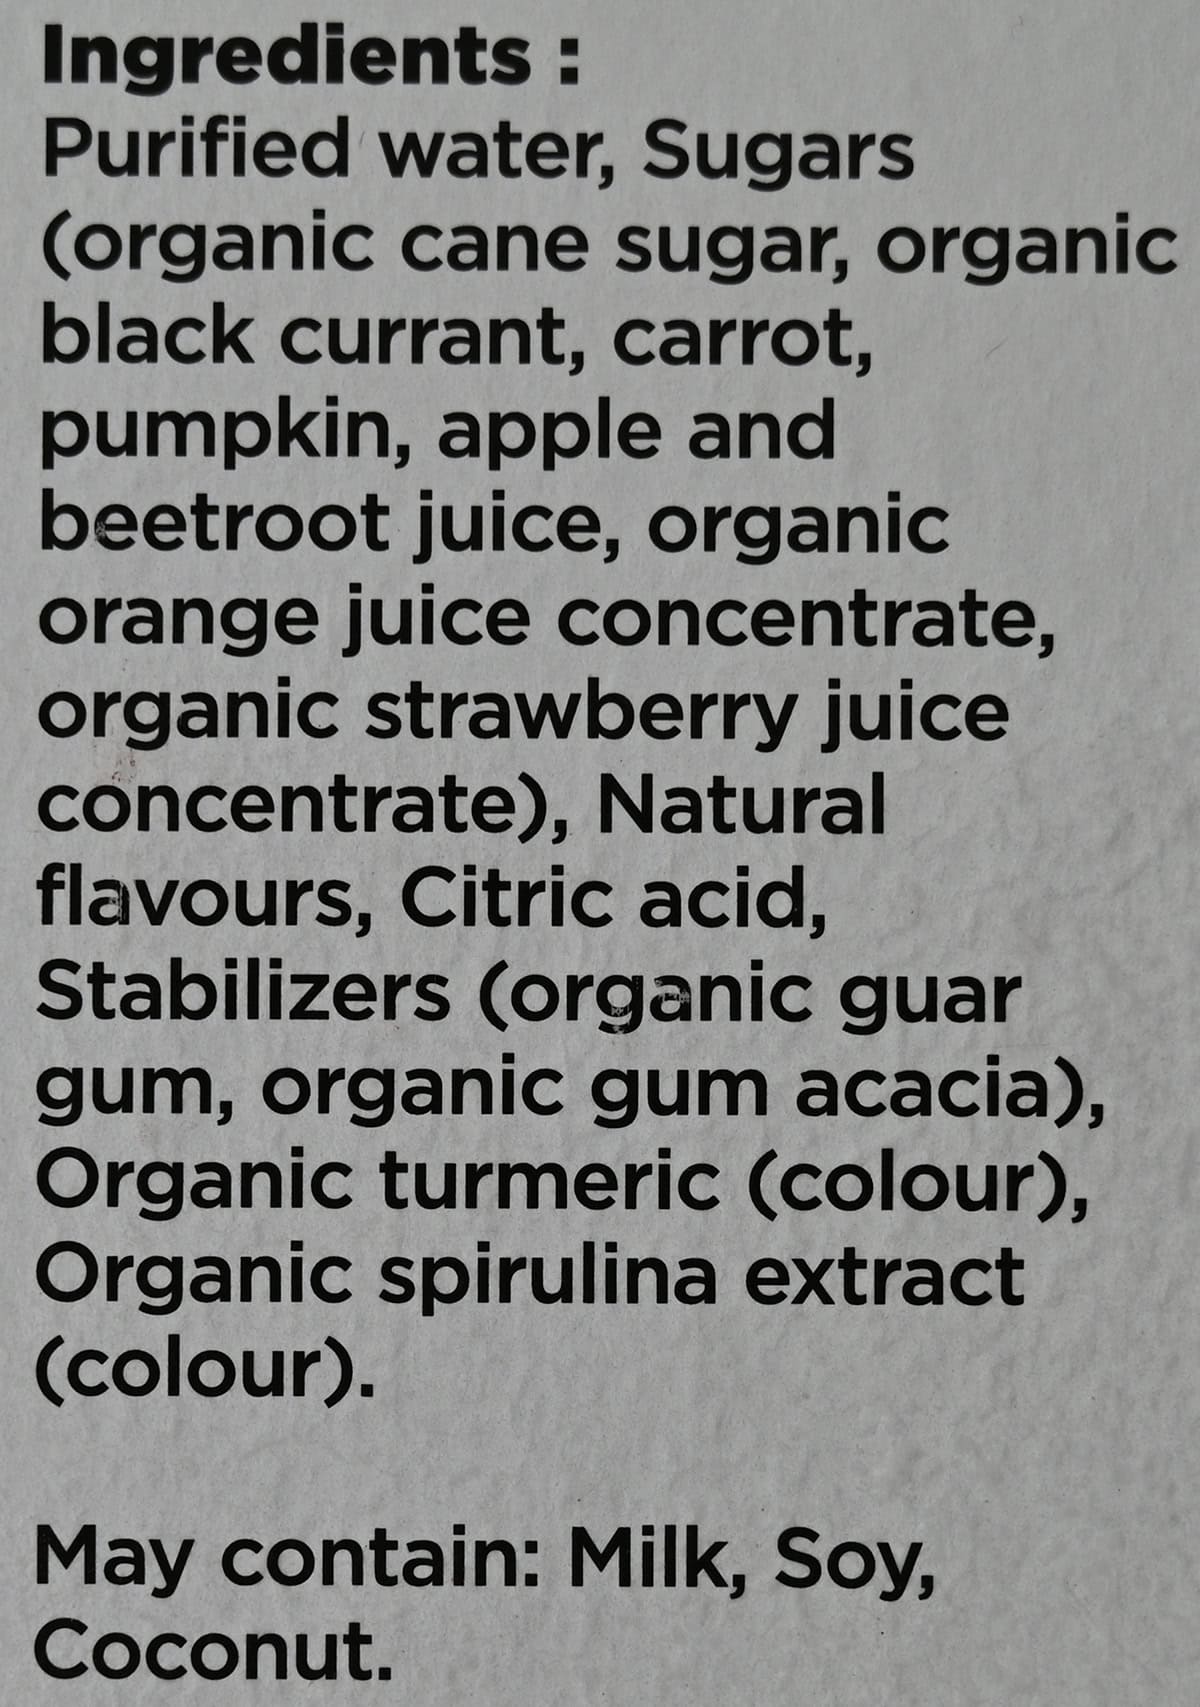 Image of the ingredients for the Jonny Pops from the back of the box.